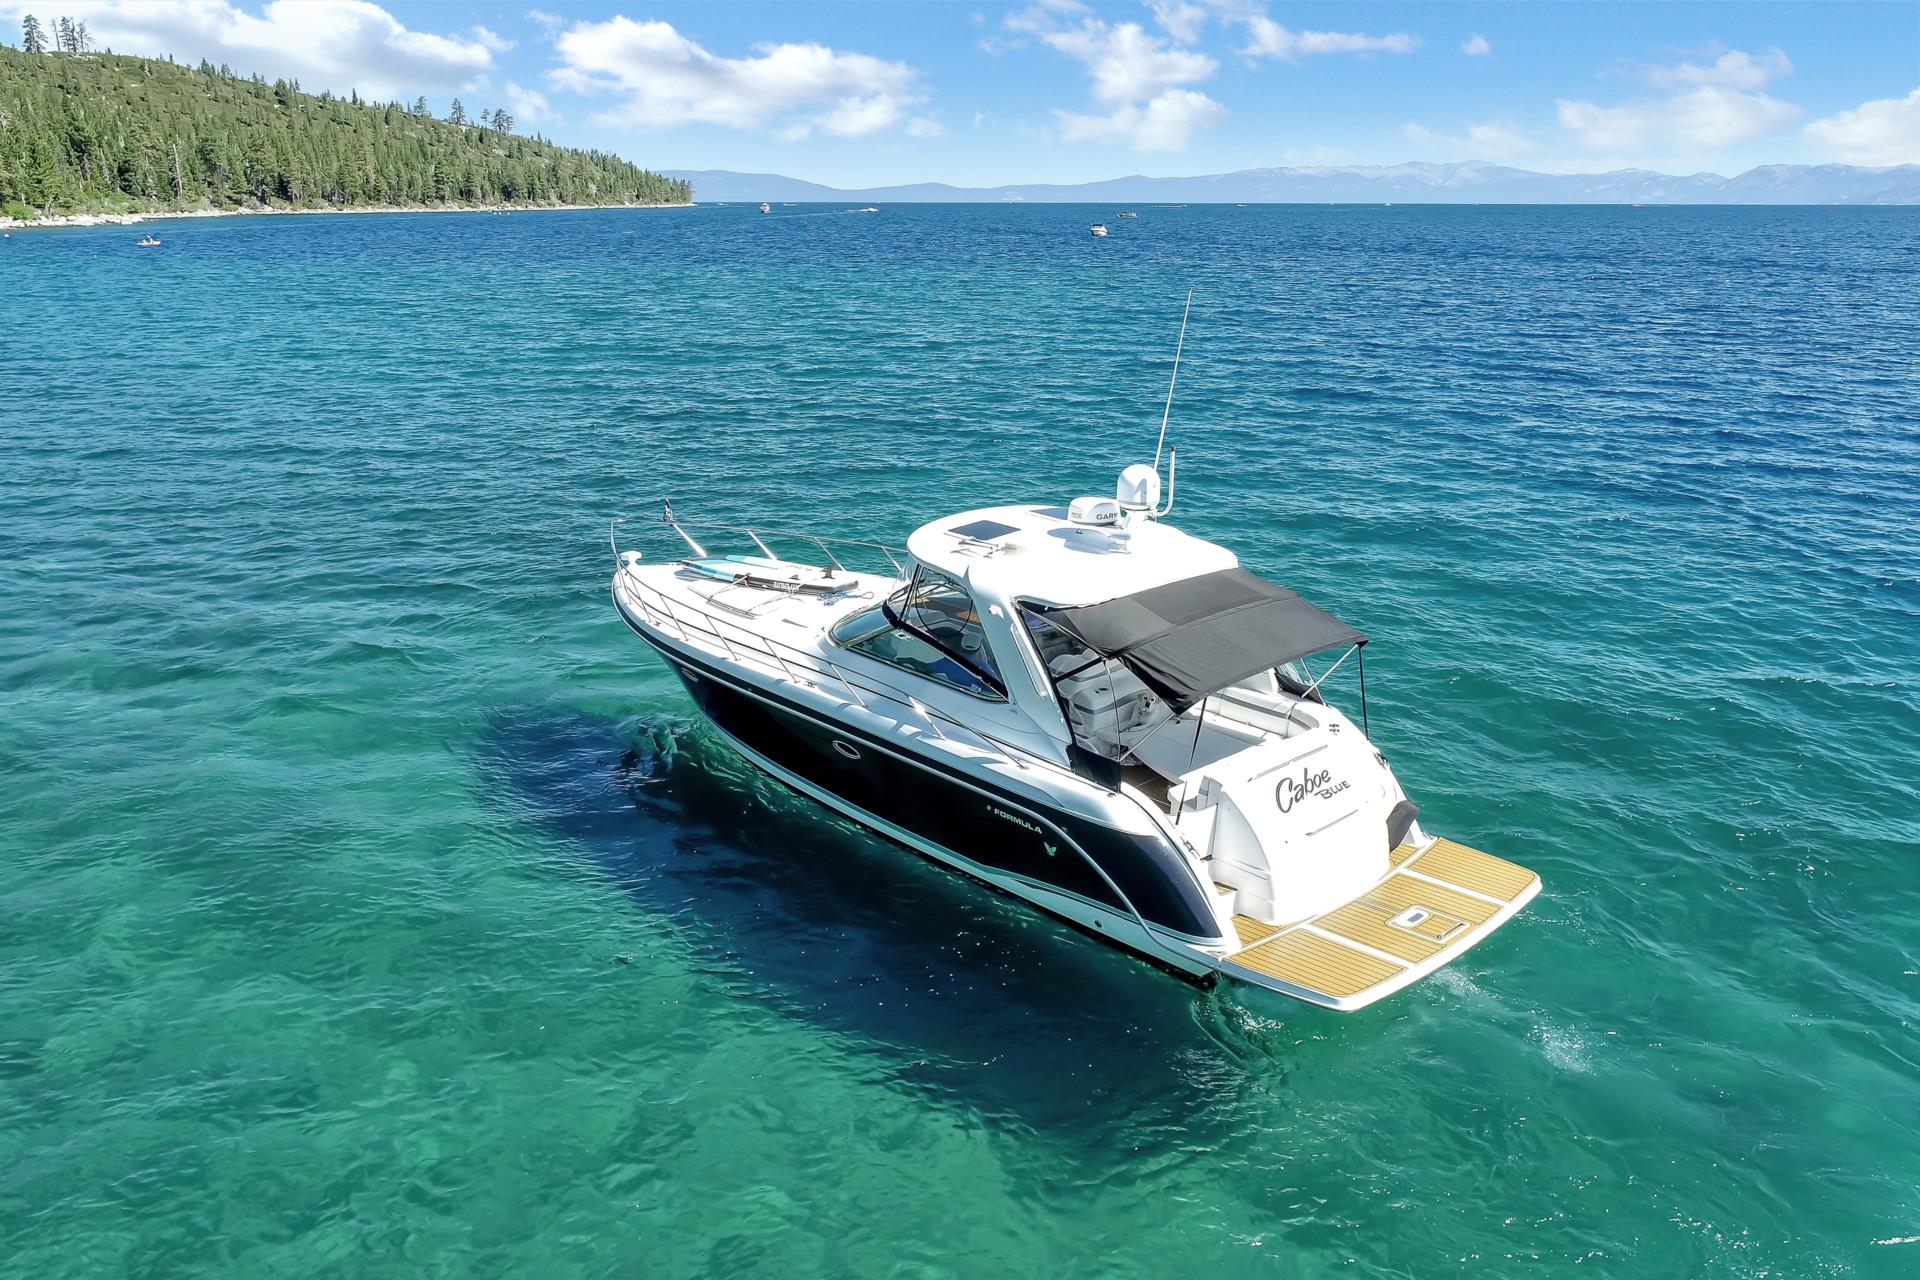 Lake Tahoe Boat Charters Private Boat Charters and Boat Tours on Lake